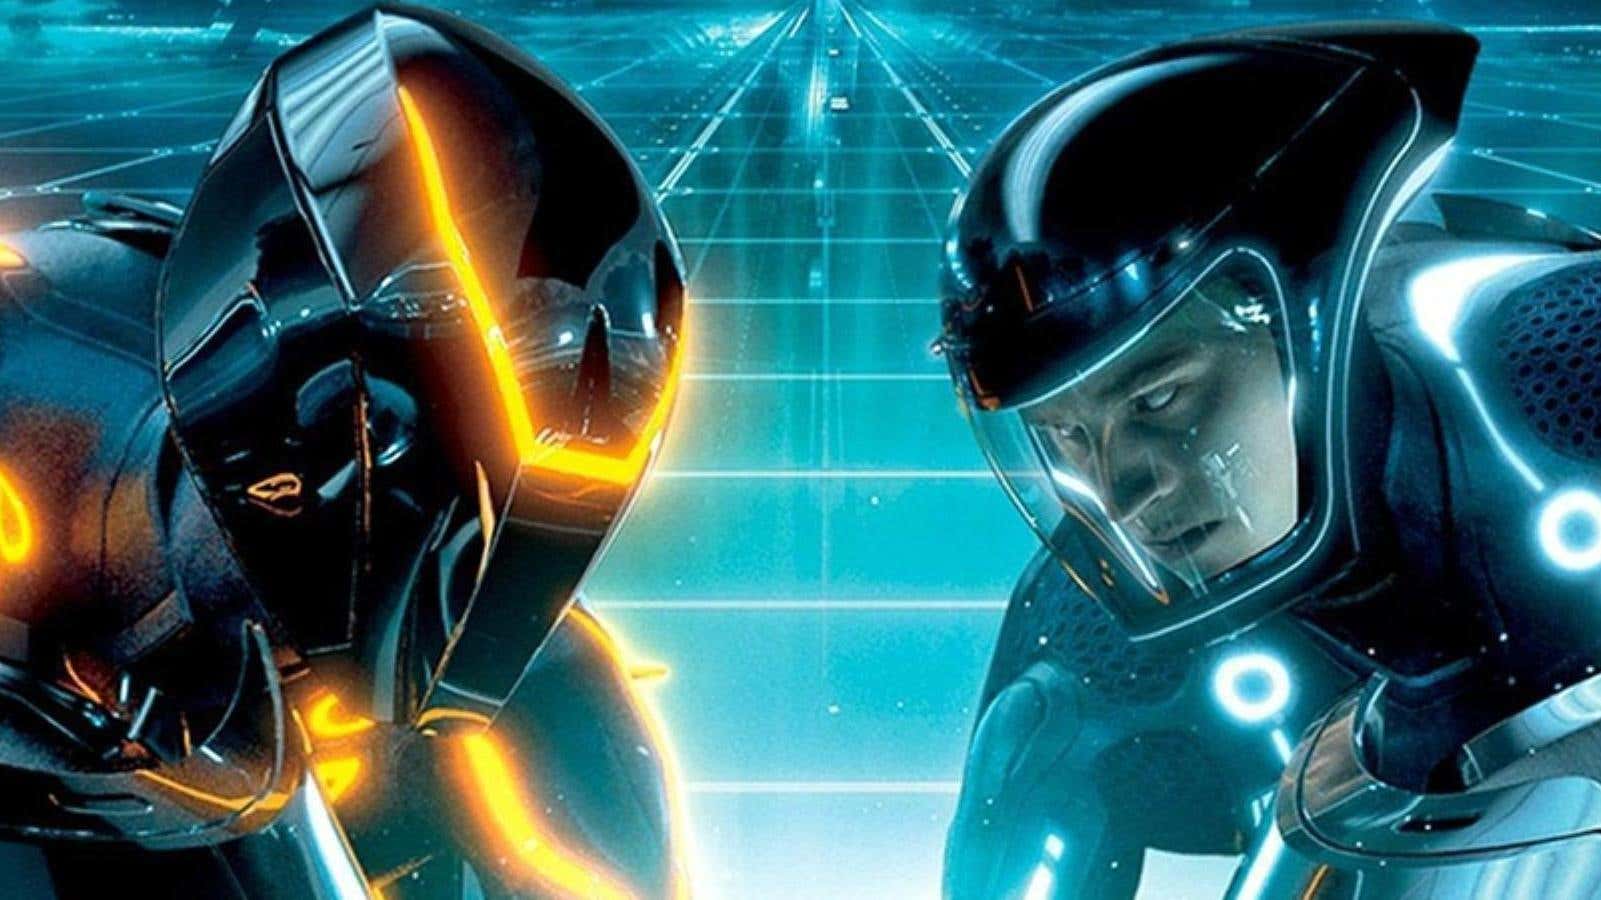 Clues compare to Sam in Disney's Tron: Legacy poster.